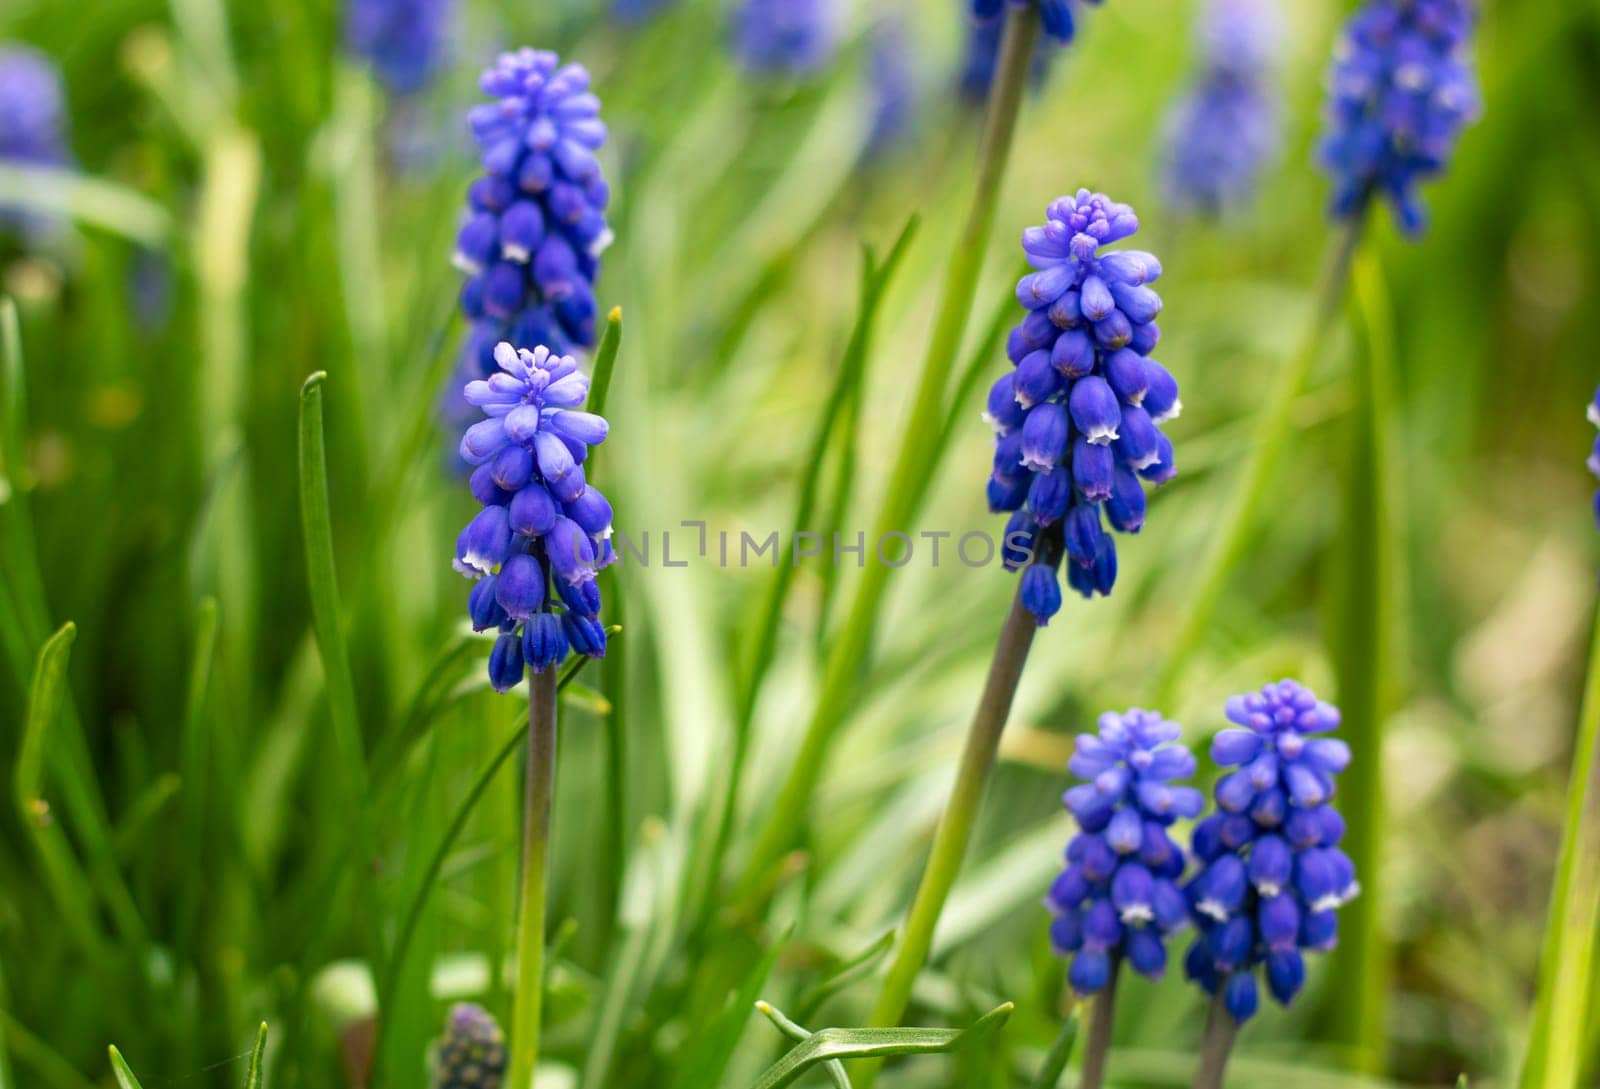 many buds spring flowers of muscari in the garden. blue bright flower buds by Suietska